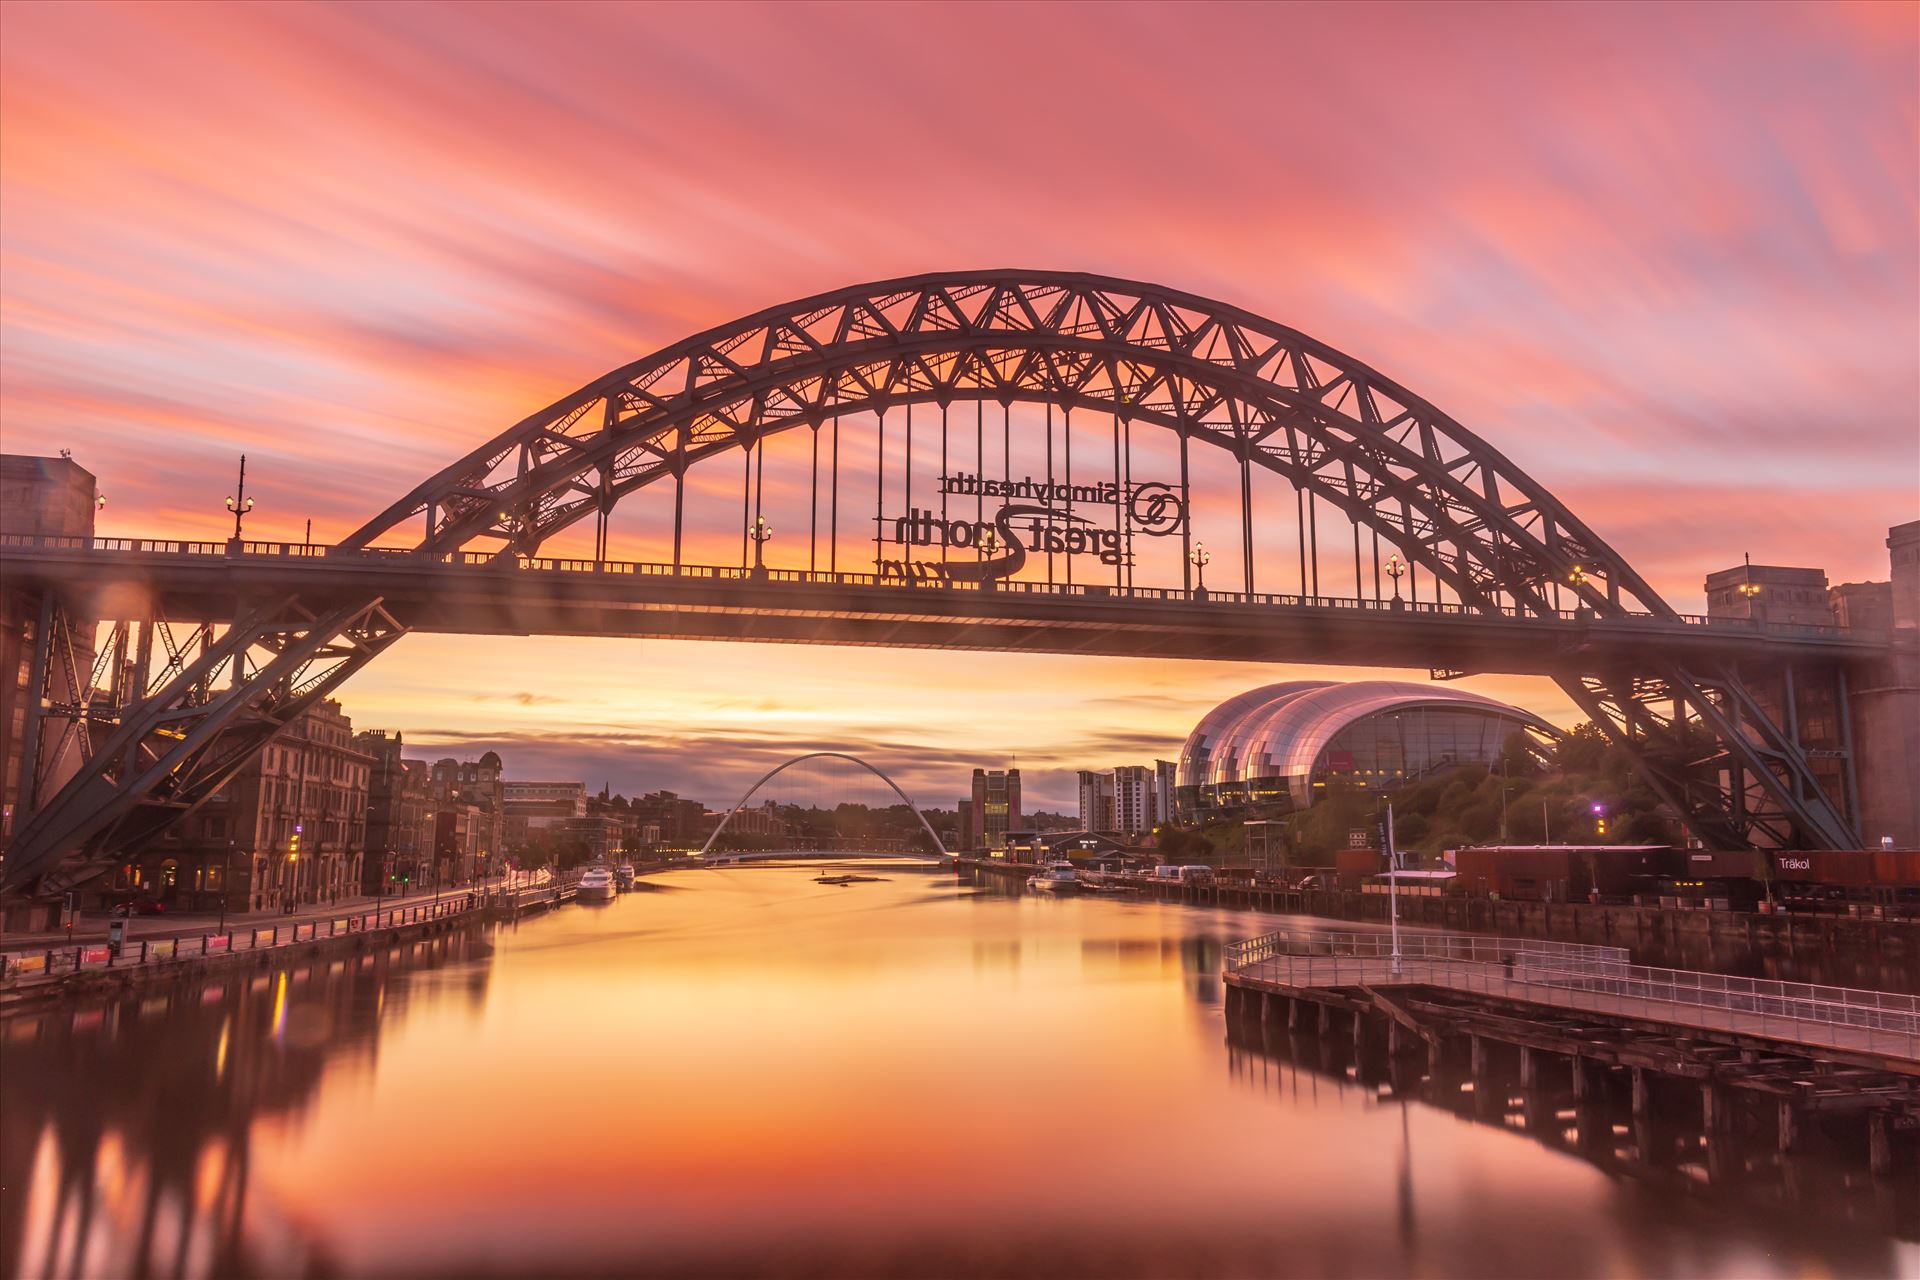 Sunrise on the Tyne bridge, Newcastle The exposure time on this one was 195 seconds to create the streaking effect in the clouds. by philreay